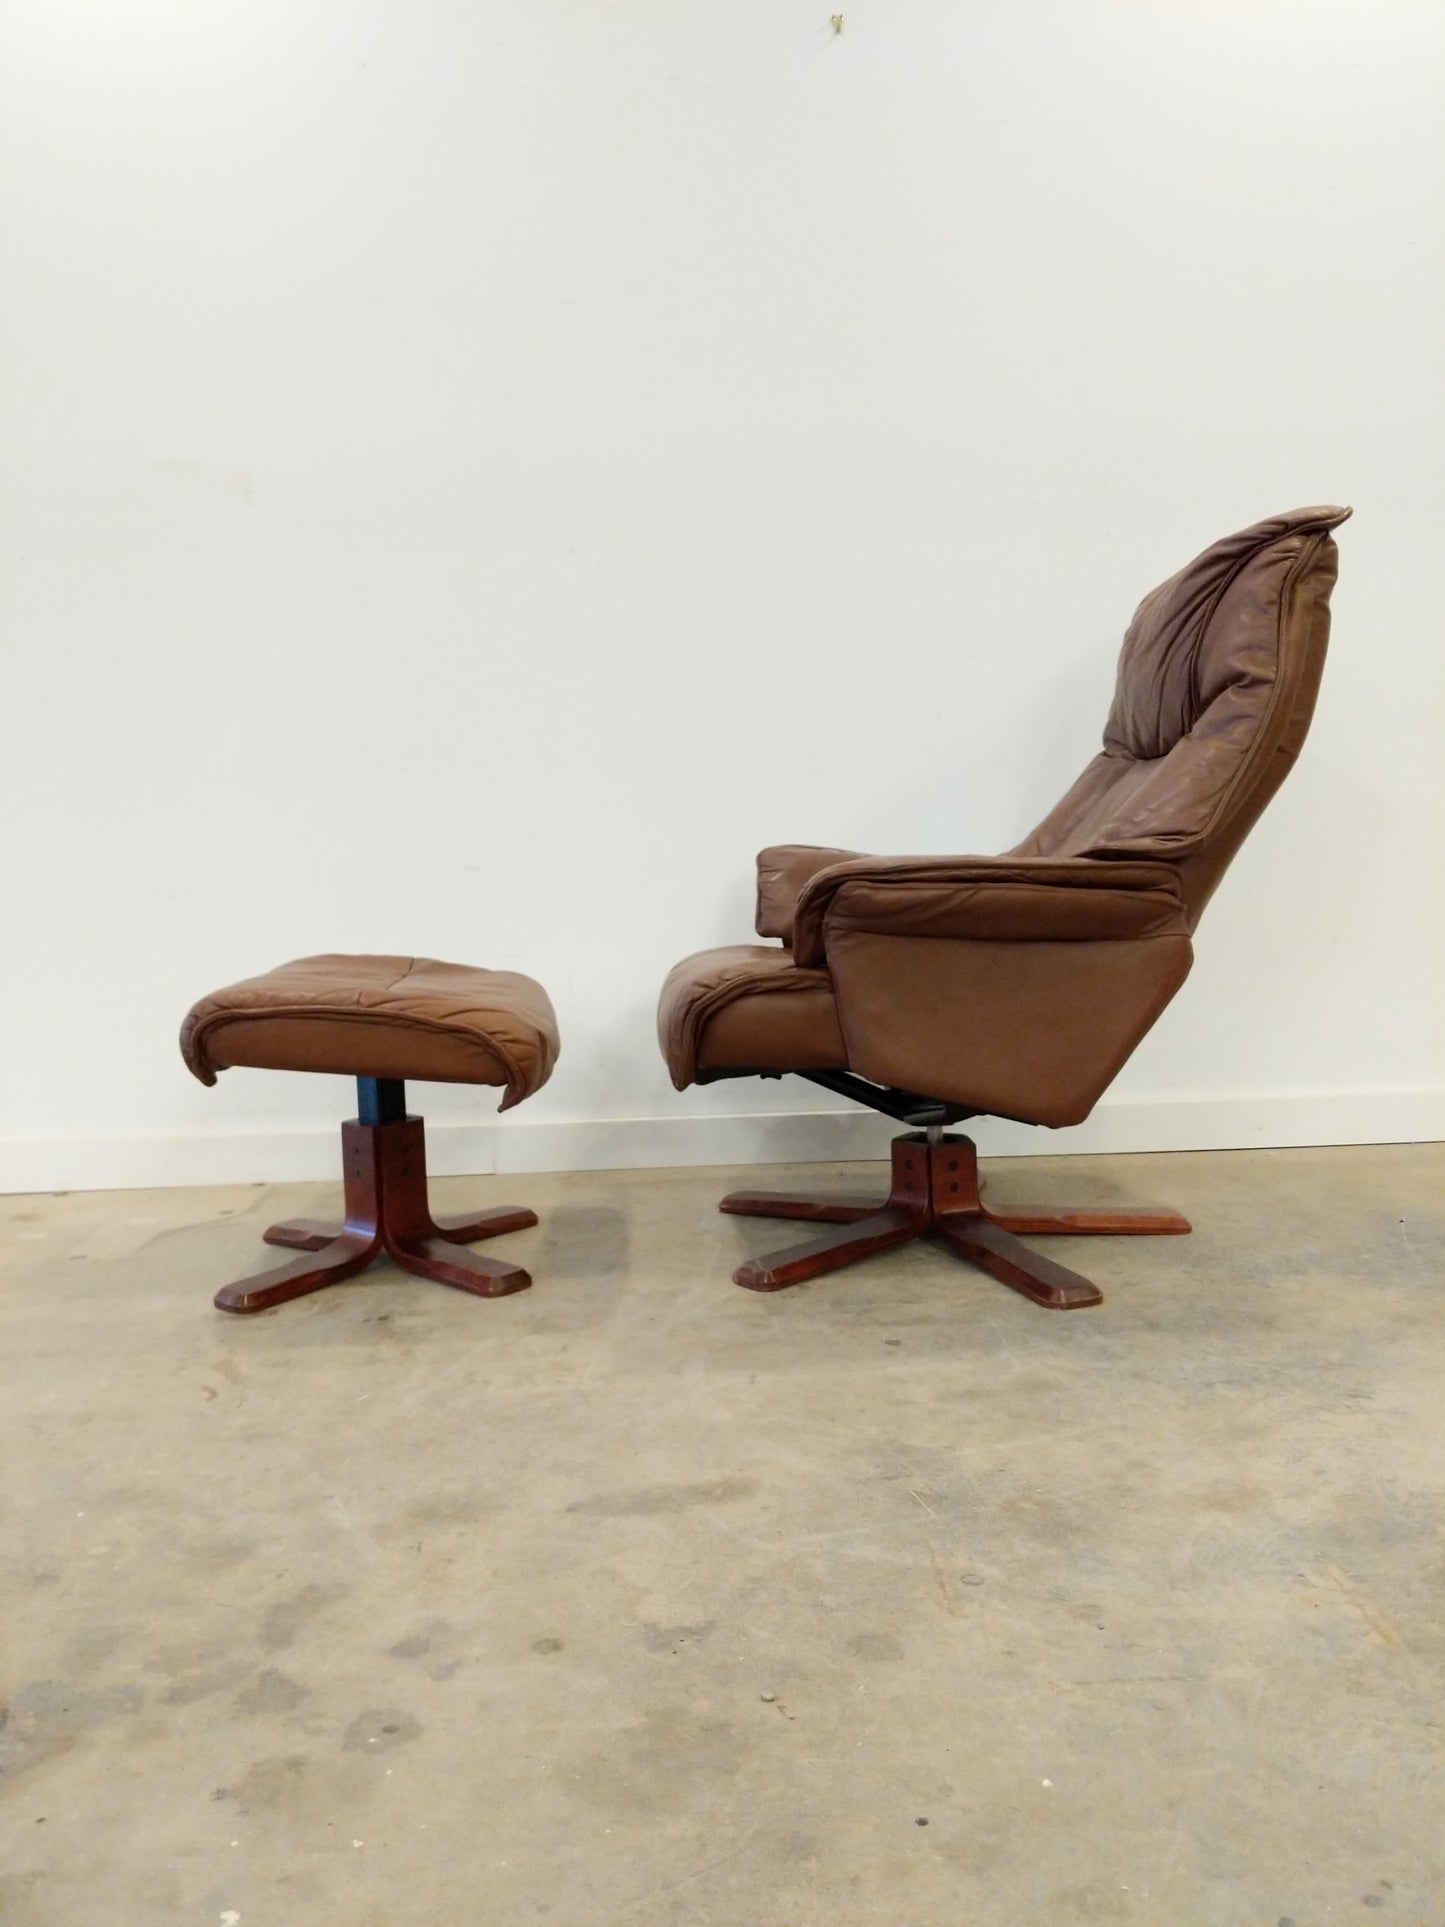 Vintage Danish Modern Lounge Chair and Footstool